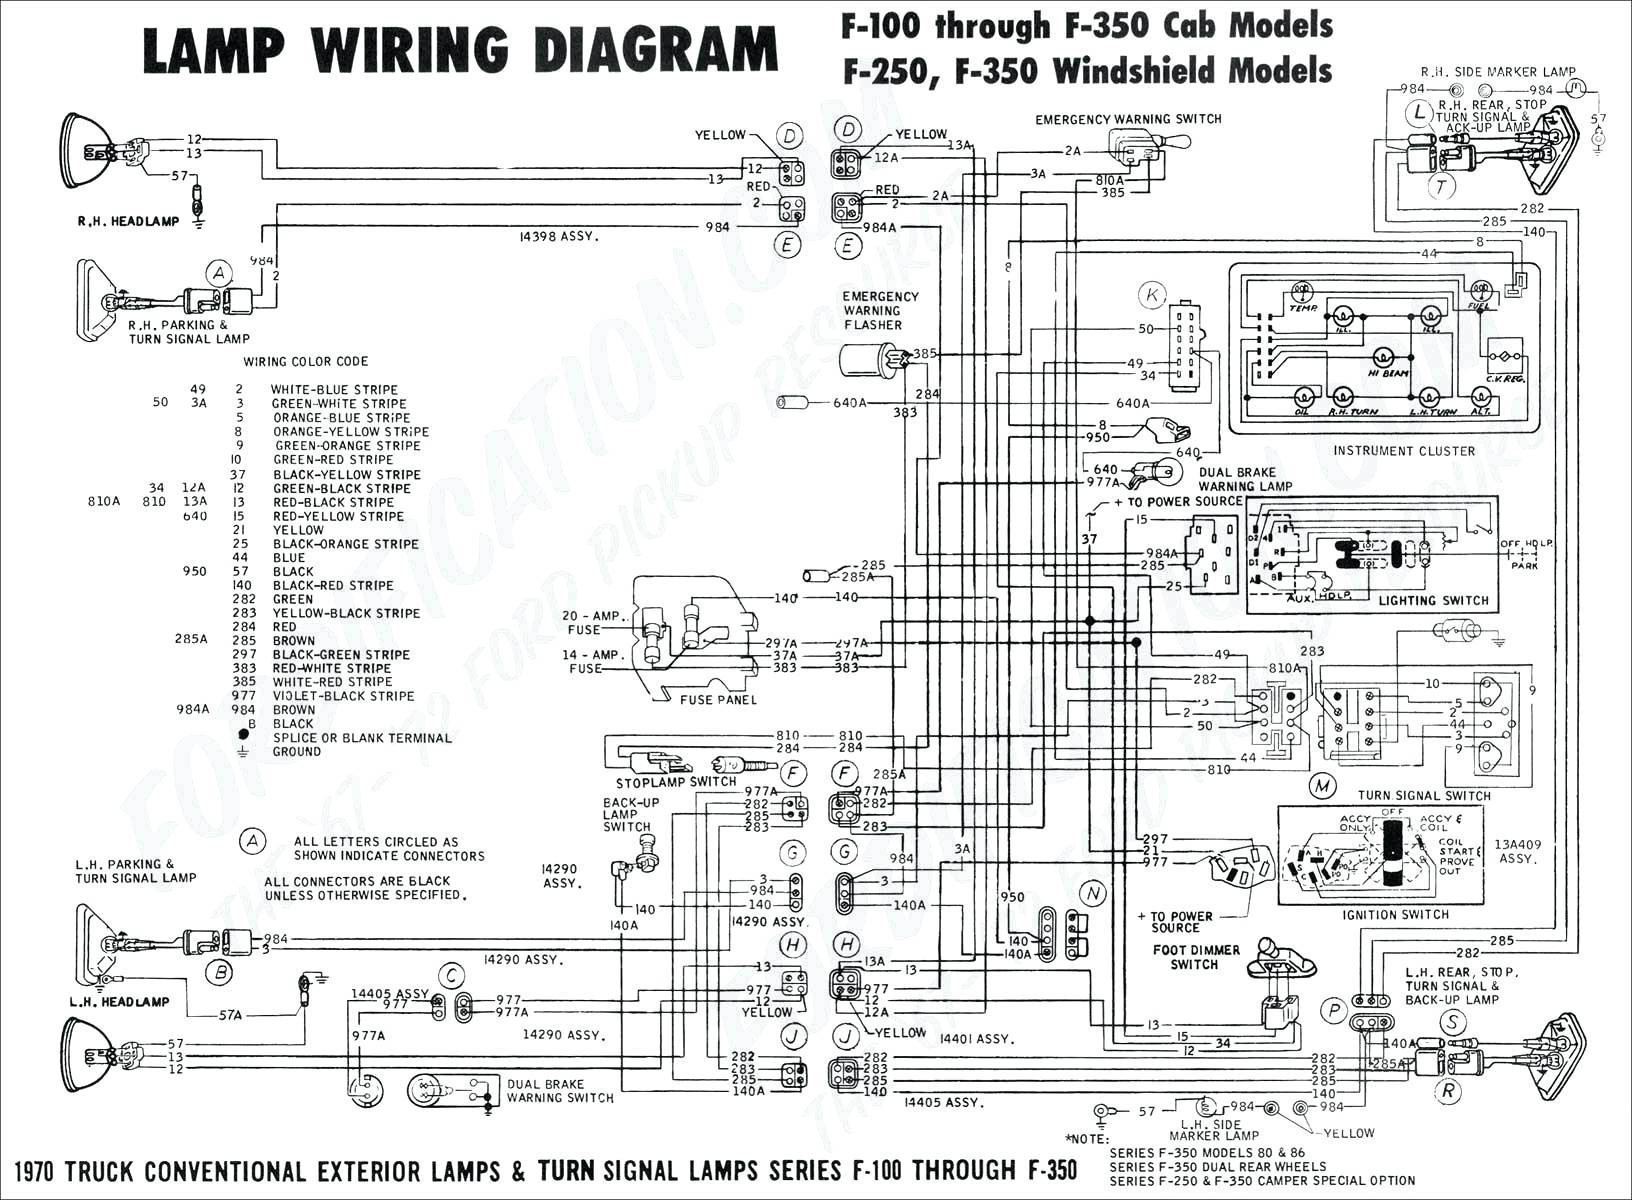 Wiring Diagram for A Light Switch Best Wiring Diagram for Gm Light Switch Best Brake Pedal